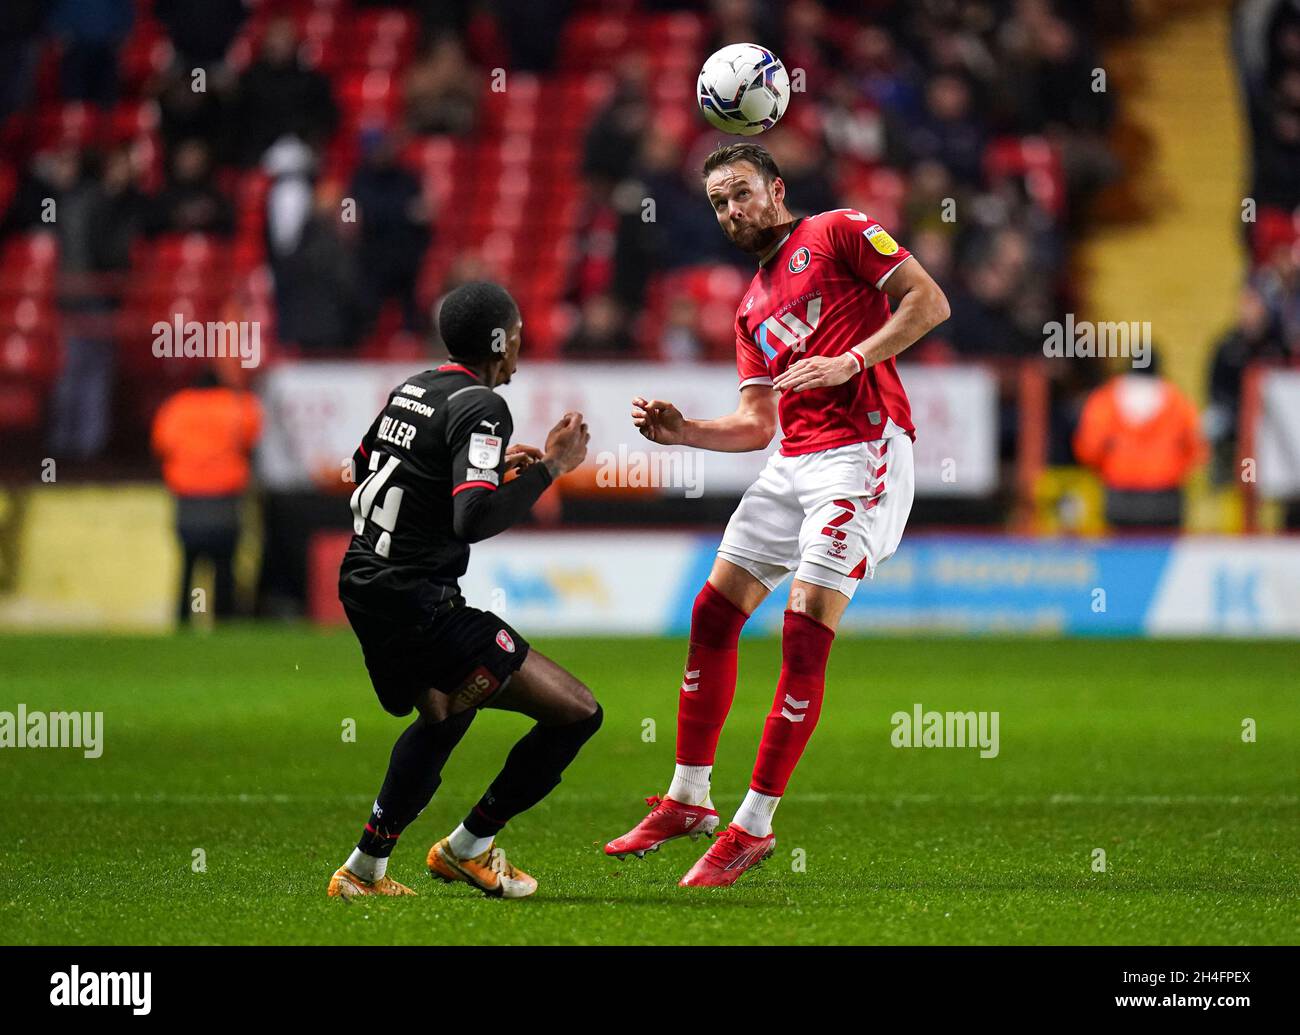 Rotherham United's Mickel Miller (left) and Charlton Athletic's Chris Gunter (right) battle for the ball during the Sky Bet League One match at The Valley, London. Picture date: Tuesday November 2, 2021. Stock Photo